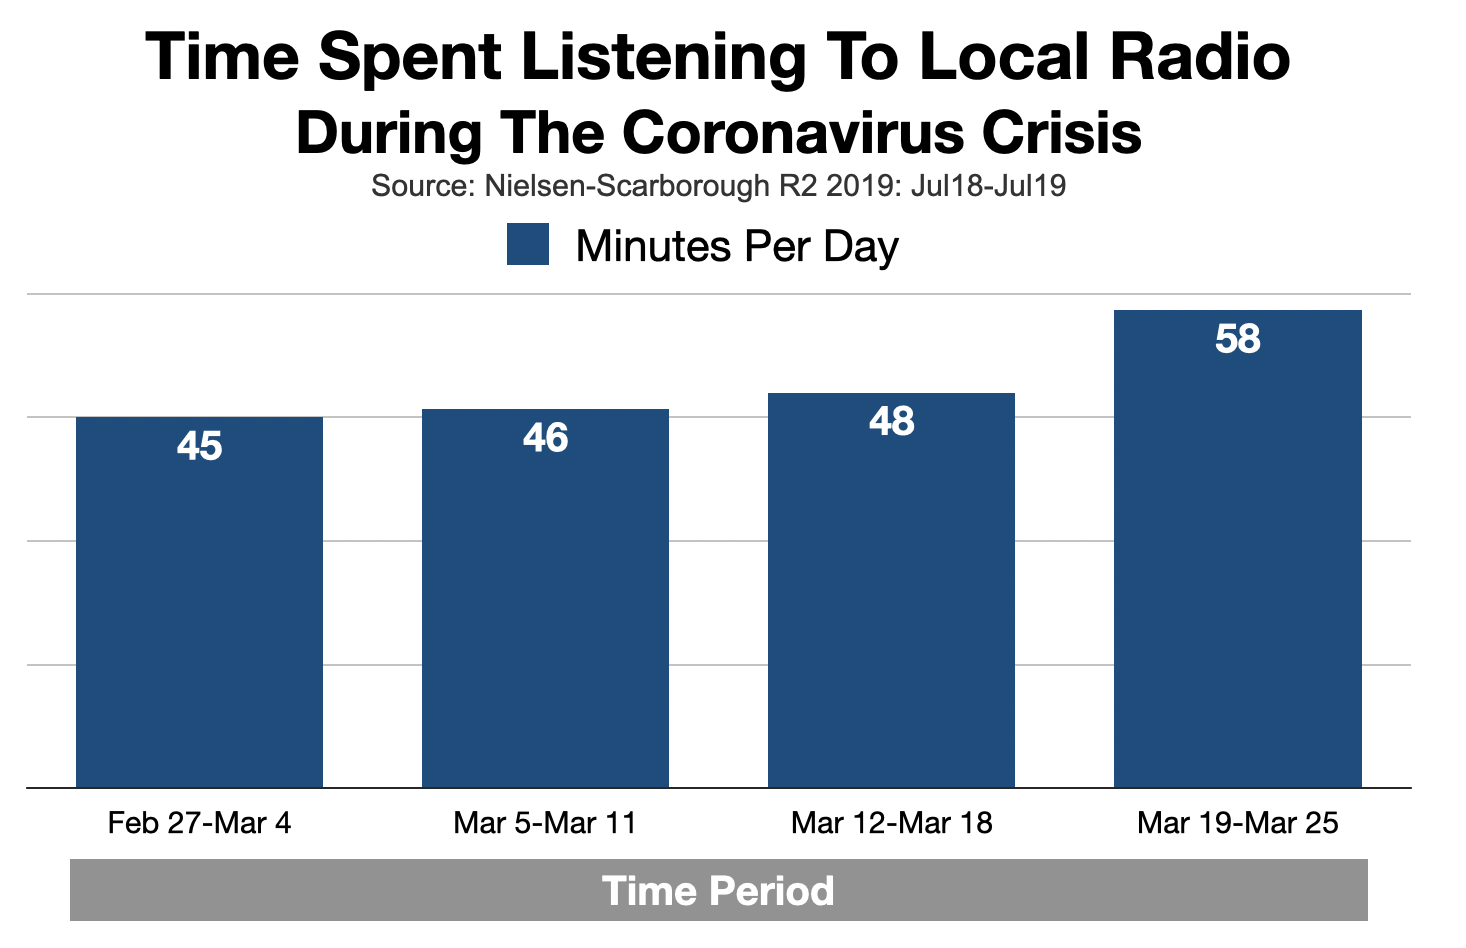 Advertise In Augusta: Time Spent Listening To Radio